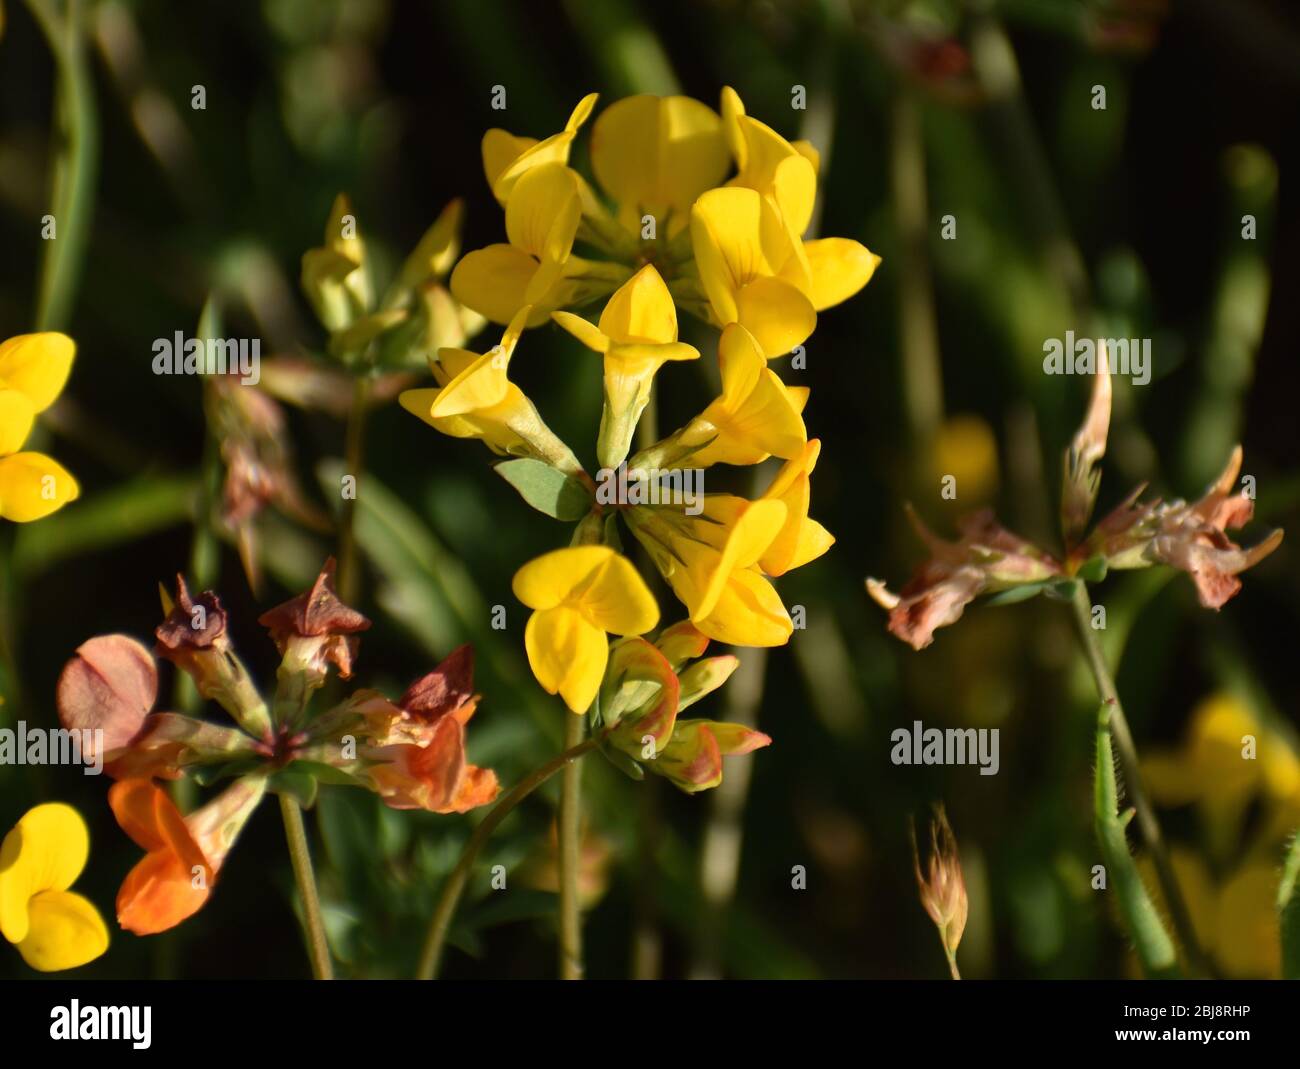 The yellow flowers of birdsfoot trefoil (Lotus corniculatus), fading to orange as they age, in the evening sun along Elkhorn Slough in California Stock Photo